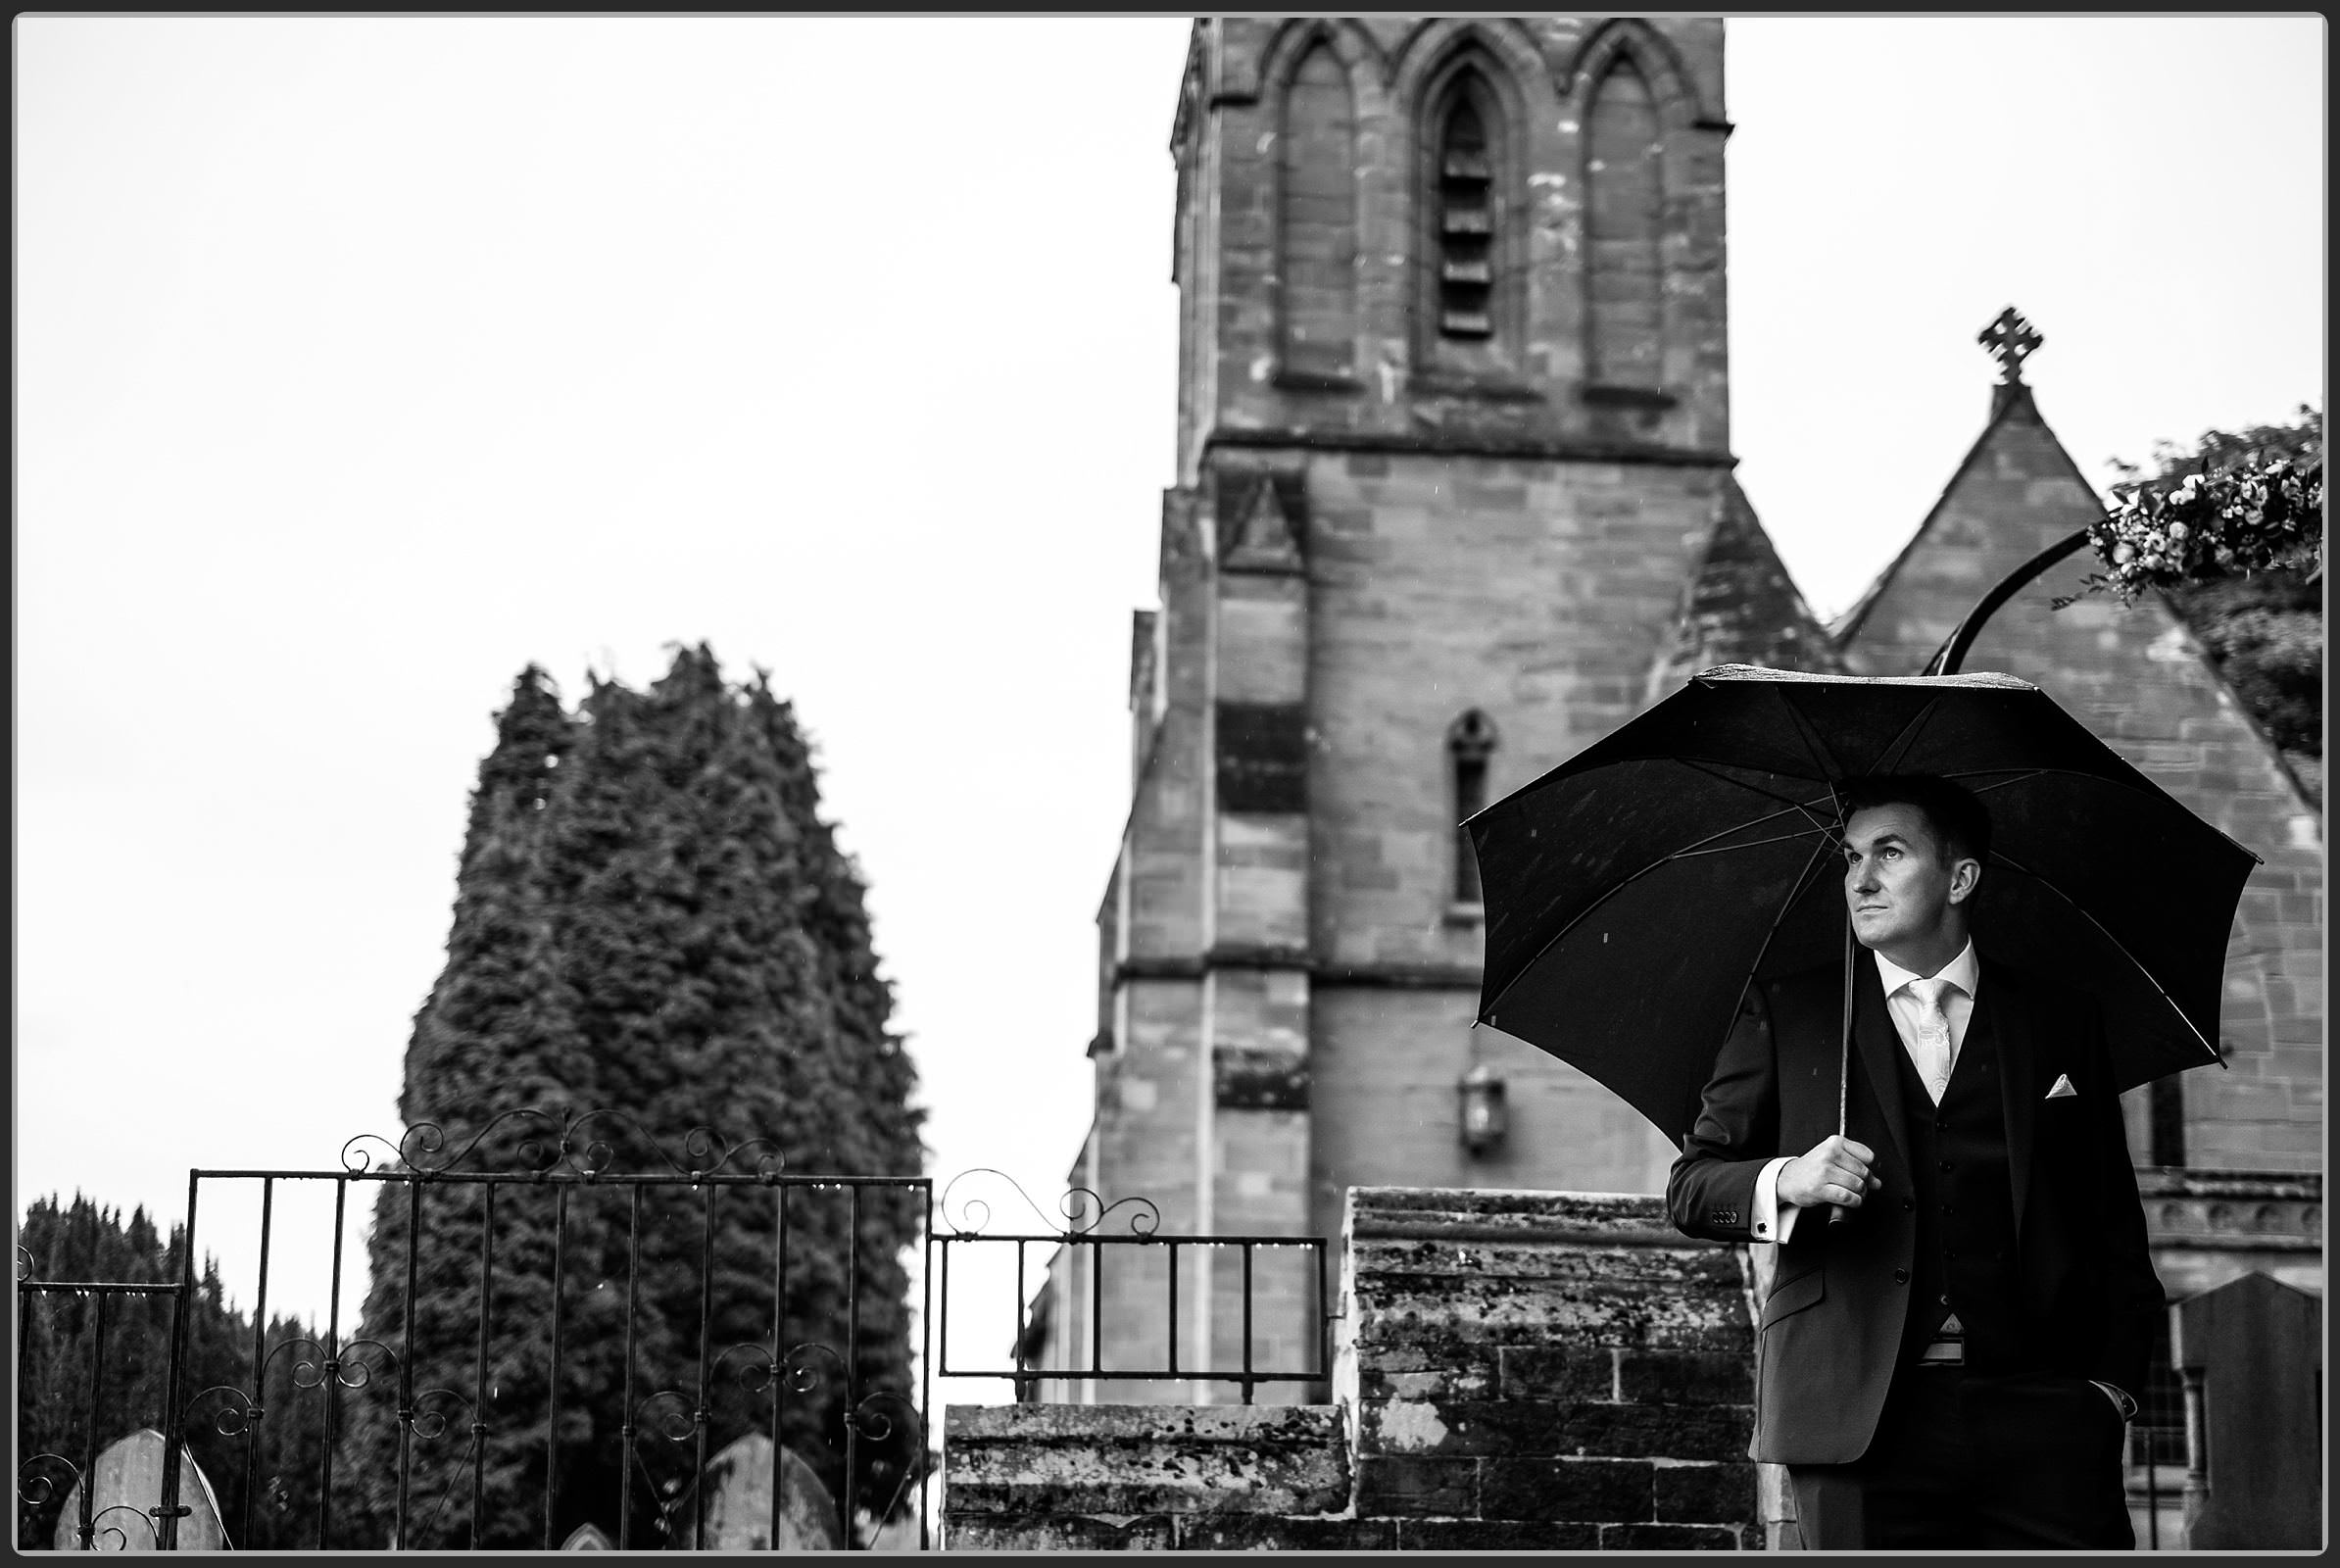 The groom outside the church